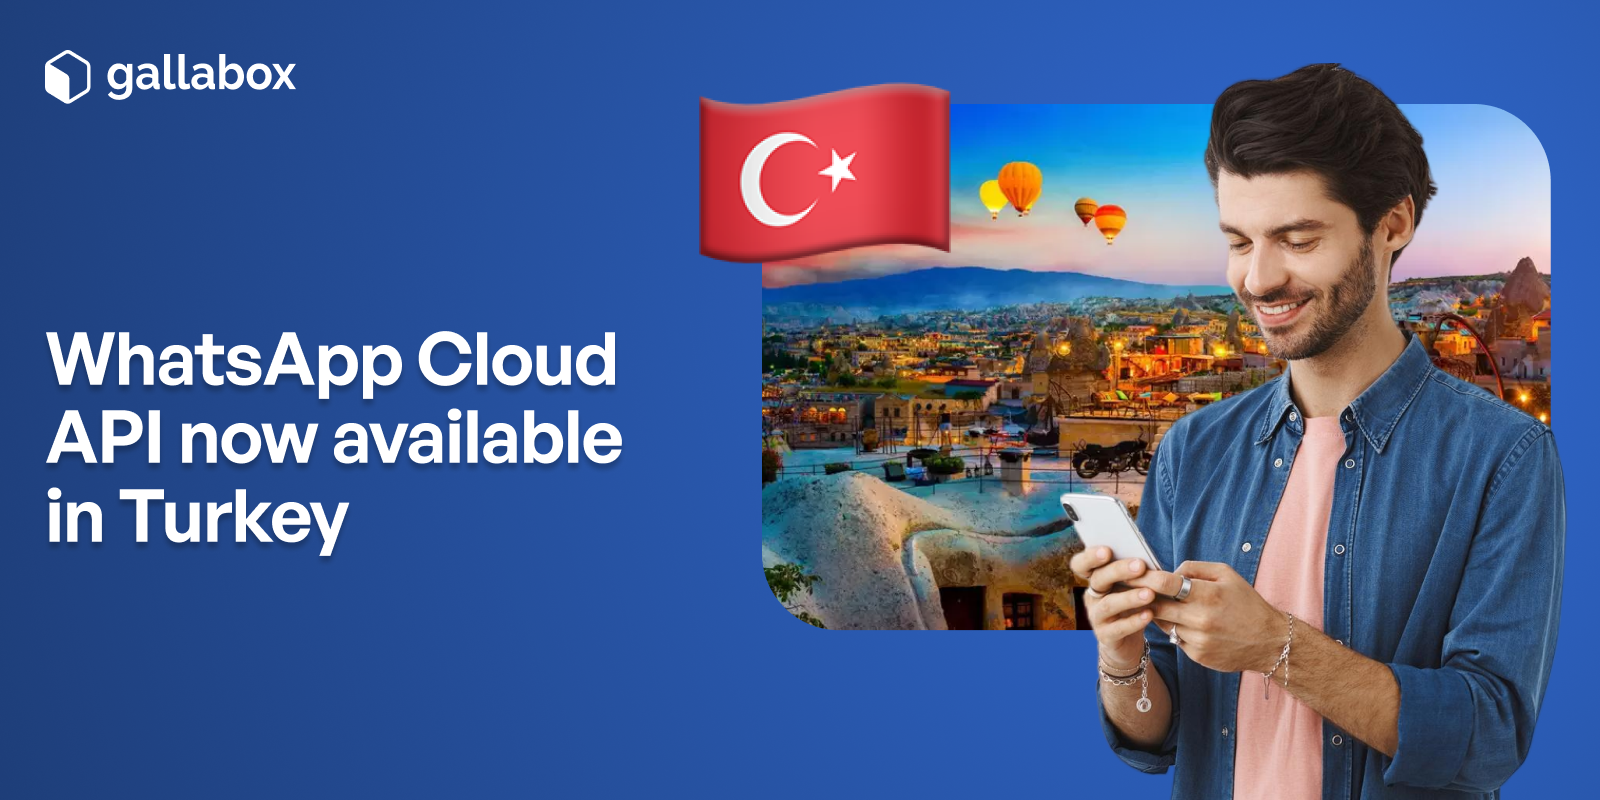 WhatsApp Cloud API now available in Turkey